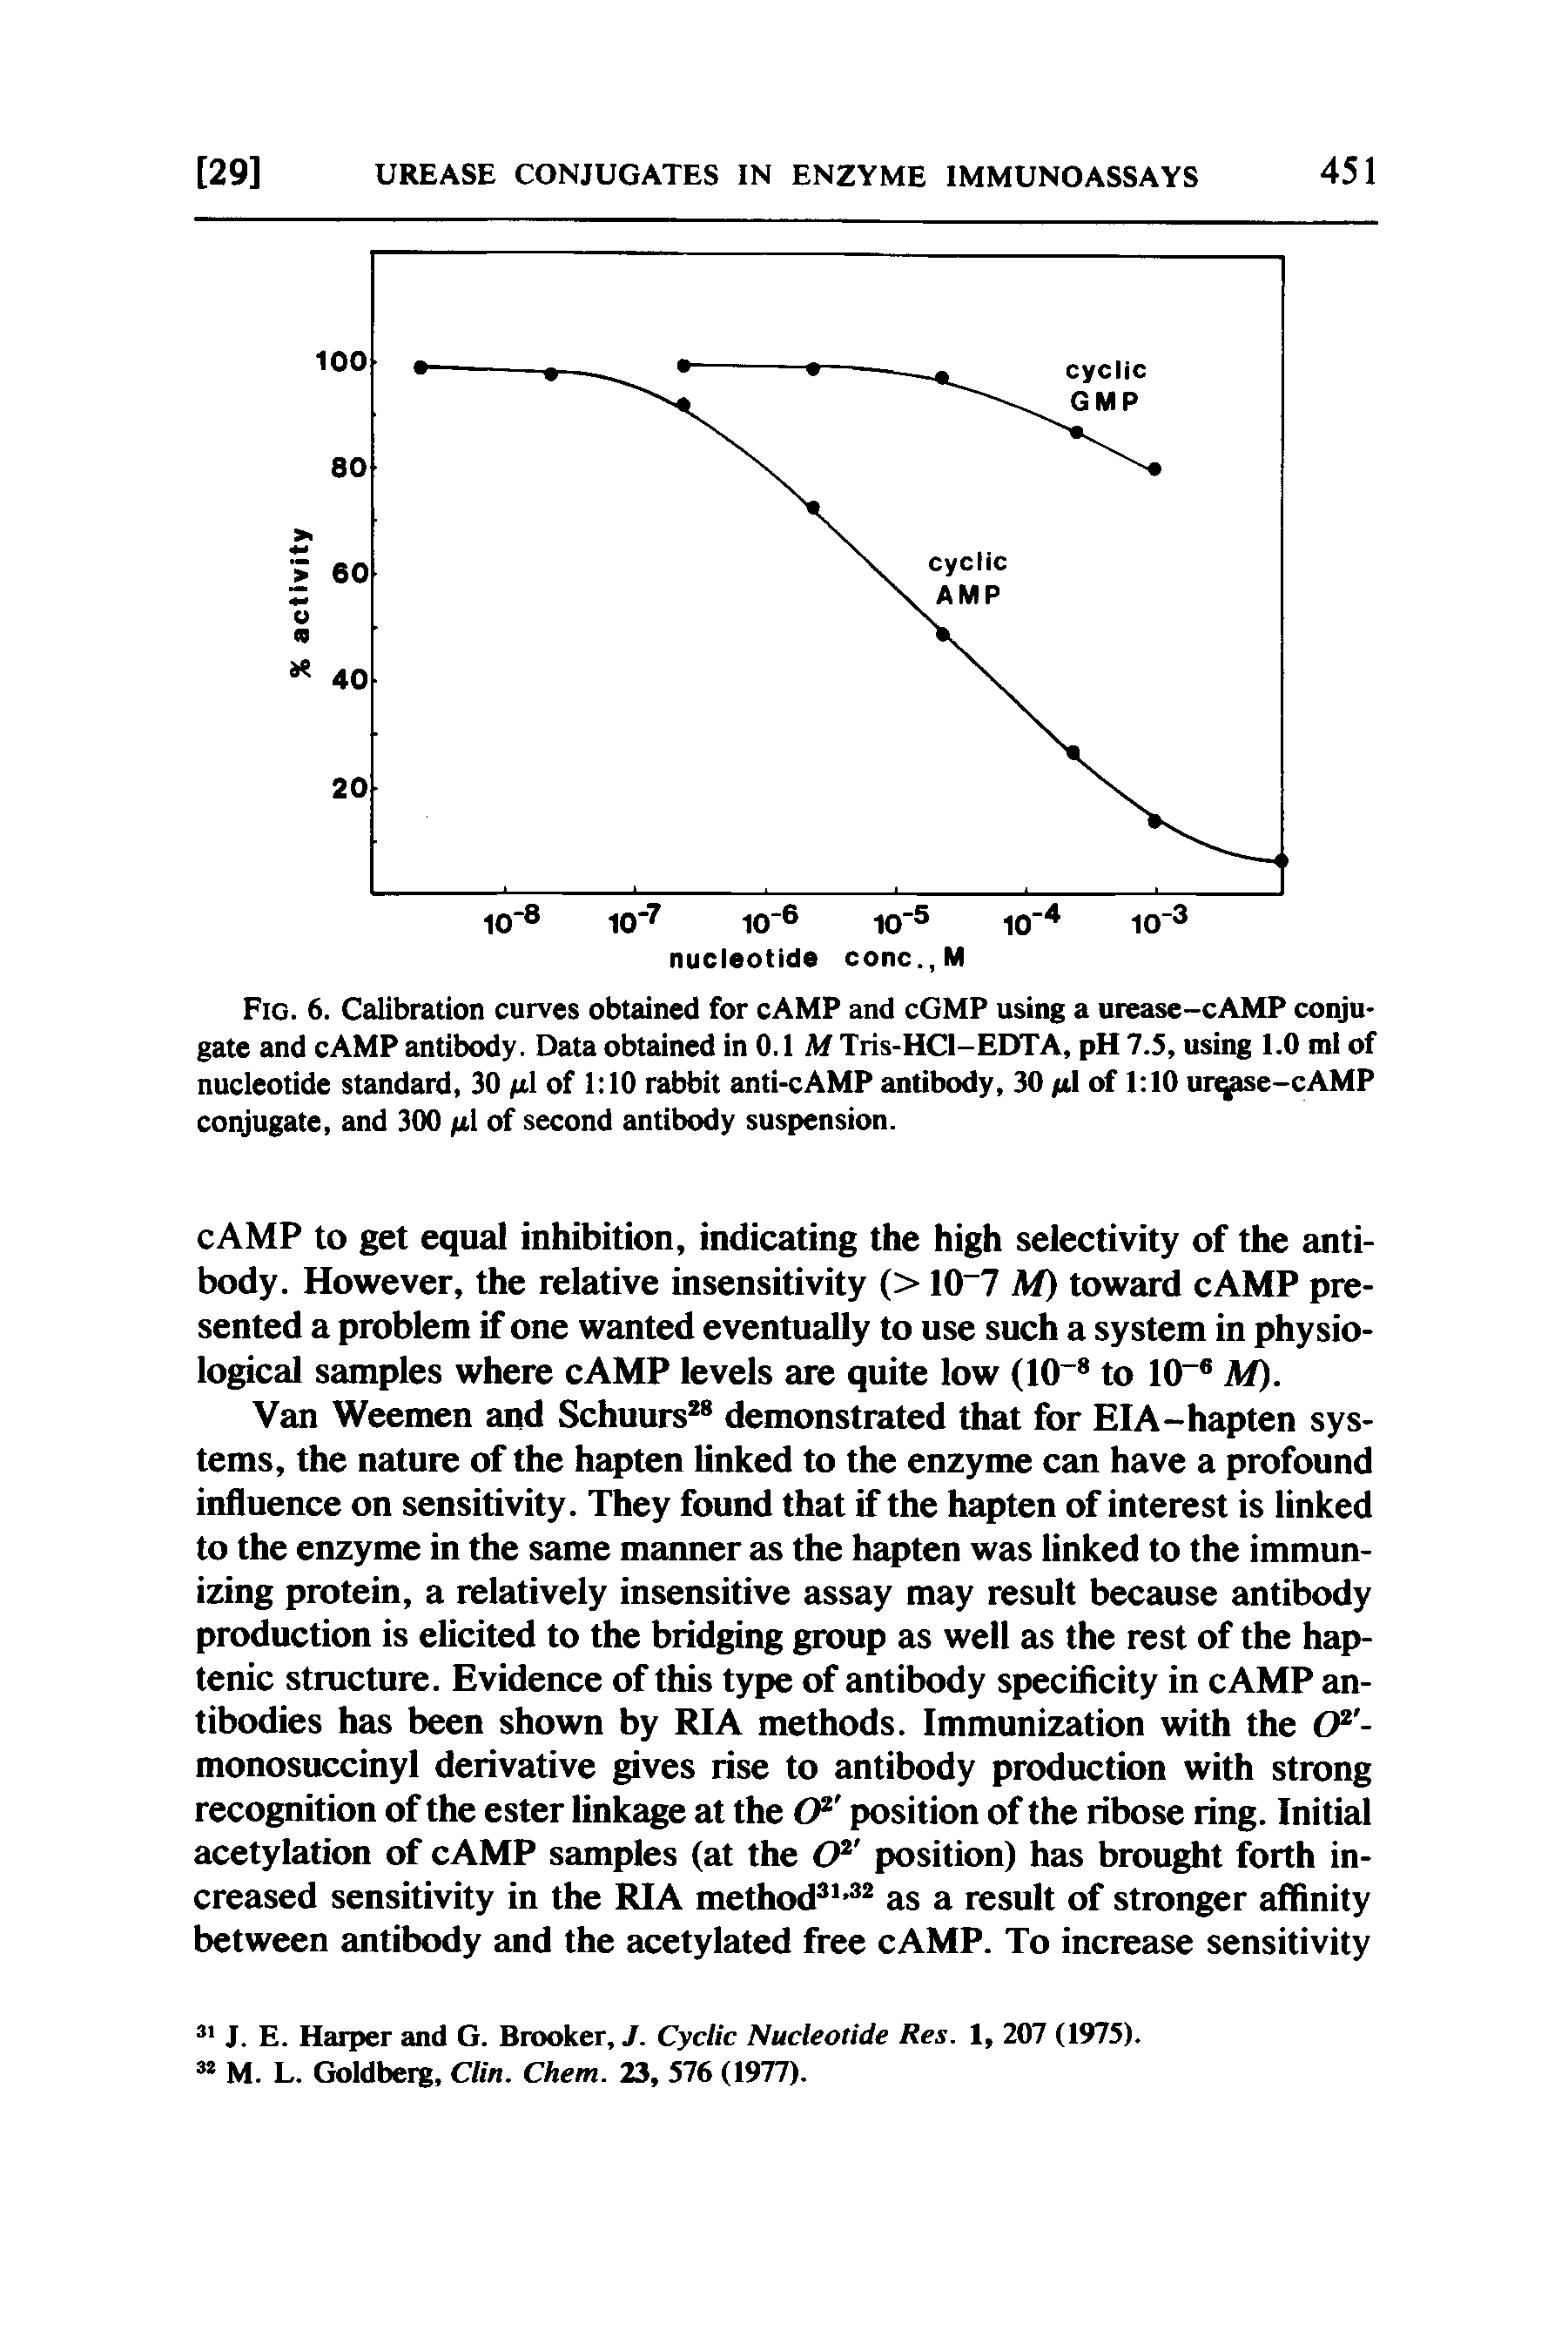 Fig. 6. Calibration curves obtained for cAMP and cGMP using a urease-cAMP conjugate and cAMP antibody. Data obtained in 0.1 M Tris-HCl-EDTA, pH 7.5, using I.O ml of nucleotide standard, 30 ju.1 of 1 10 rabbit anti-cAMP antibody, 30 /itl of 1 10 urtjfise-cAMP coiyugate, and 300 1 of second antibody suspension.